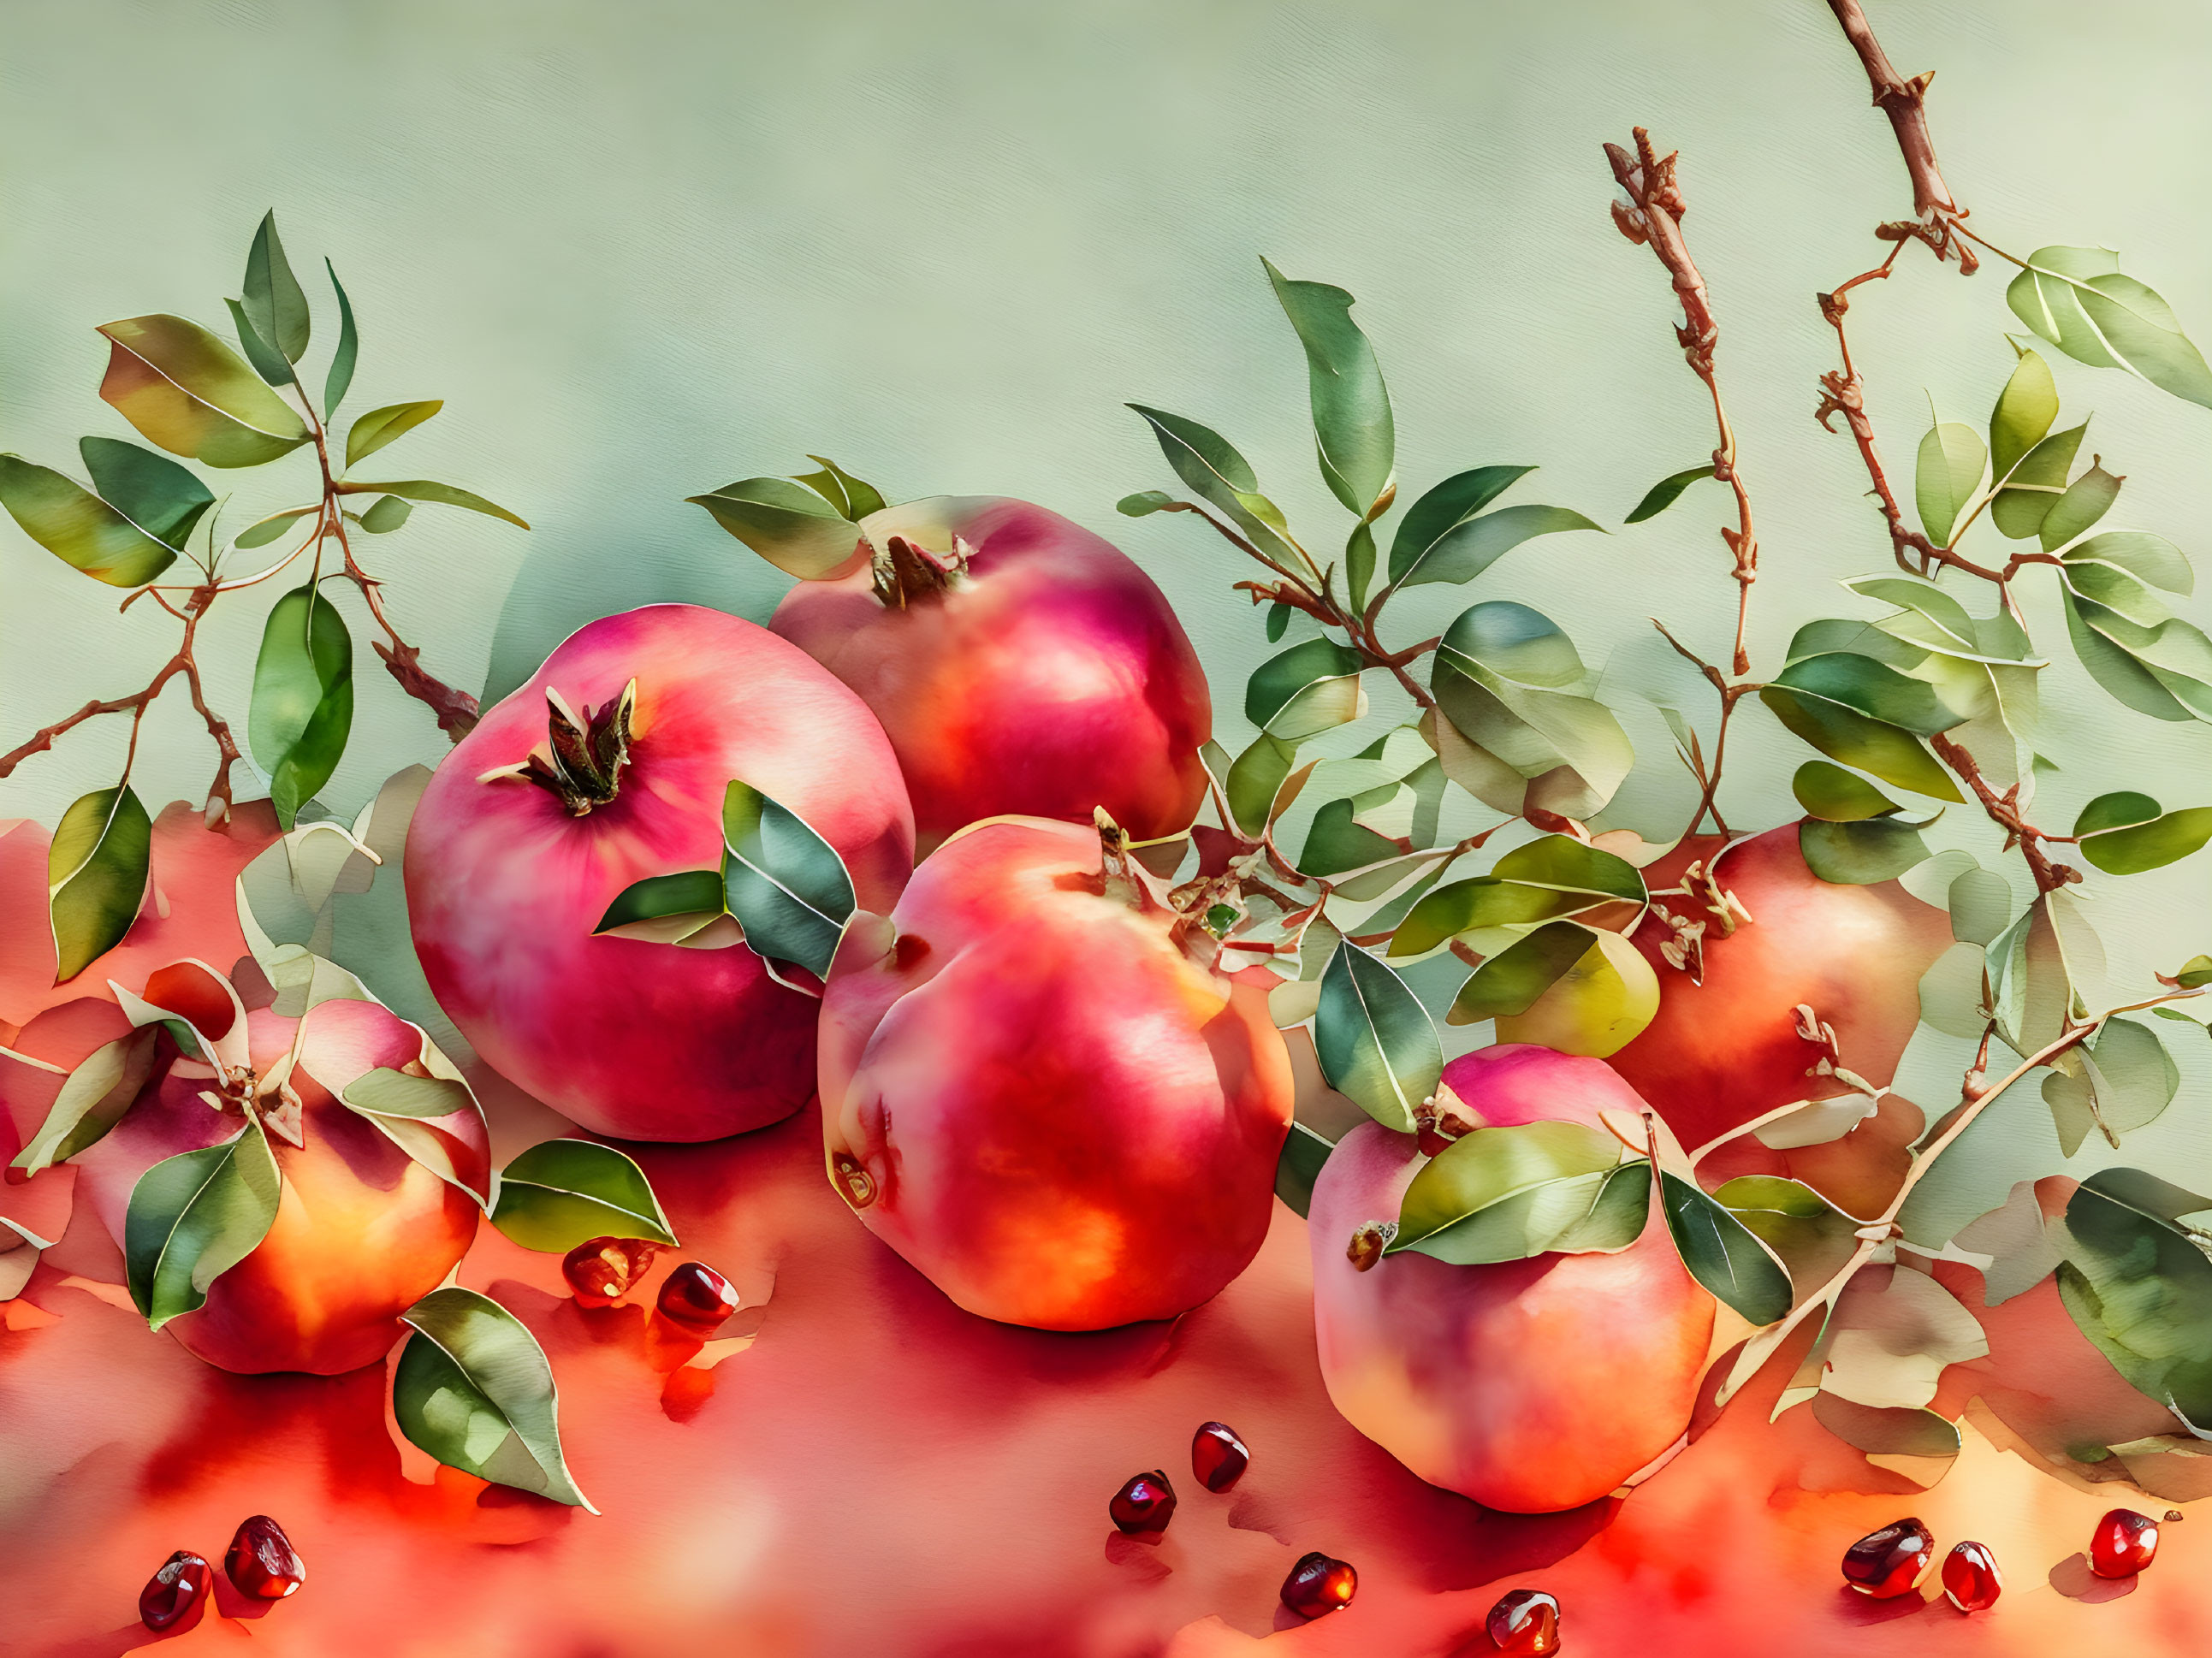 Colorful still life with ripe pomegranates, seeds, and branches on soft background